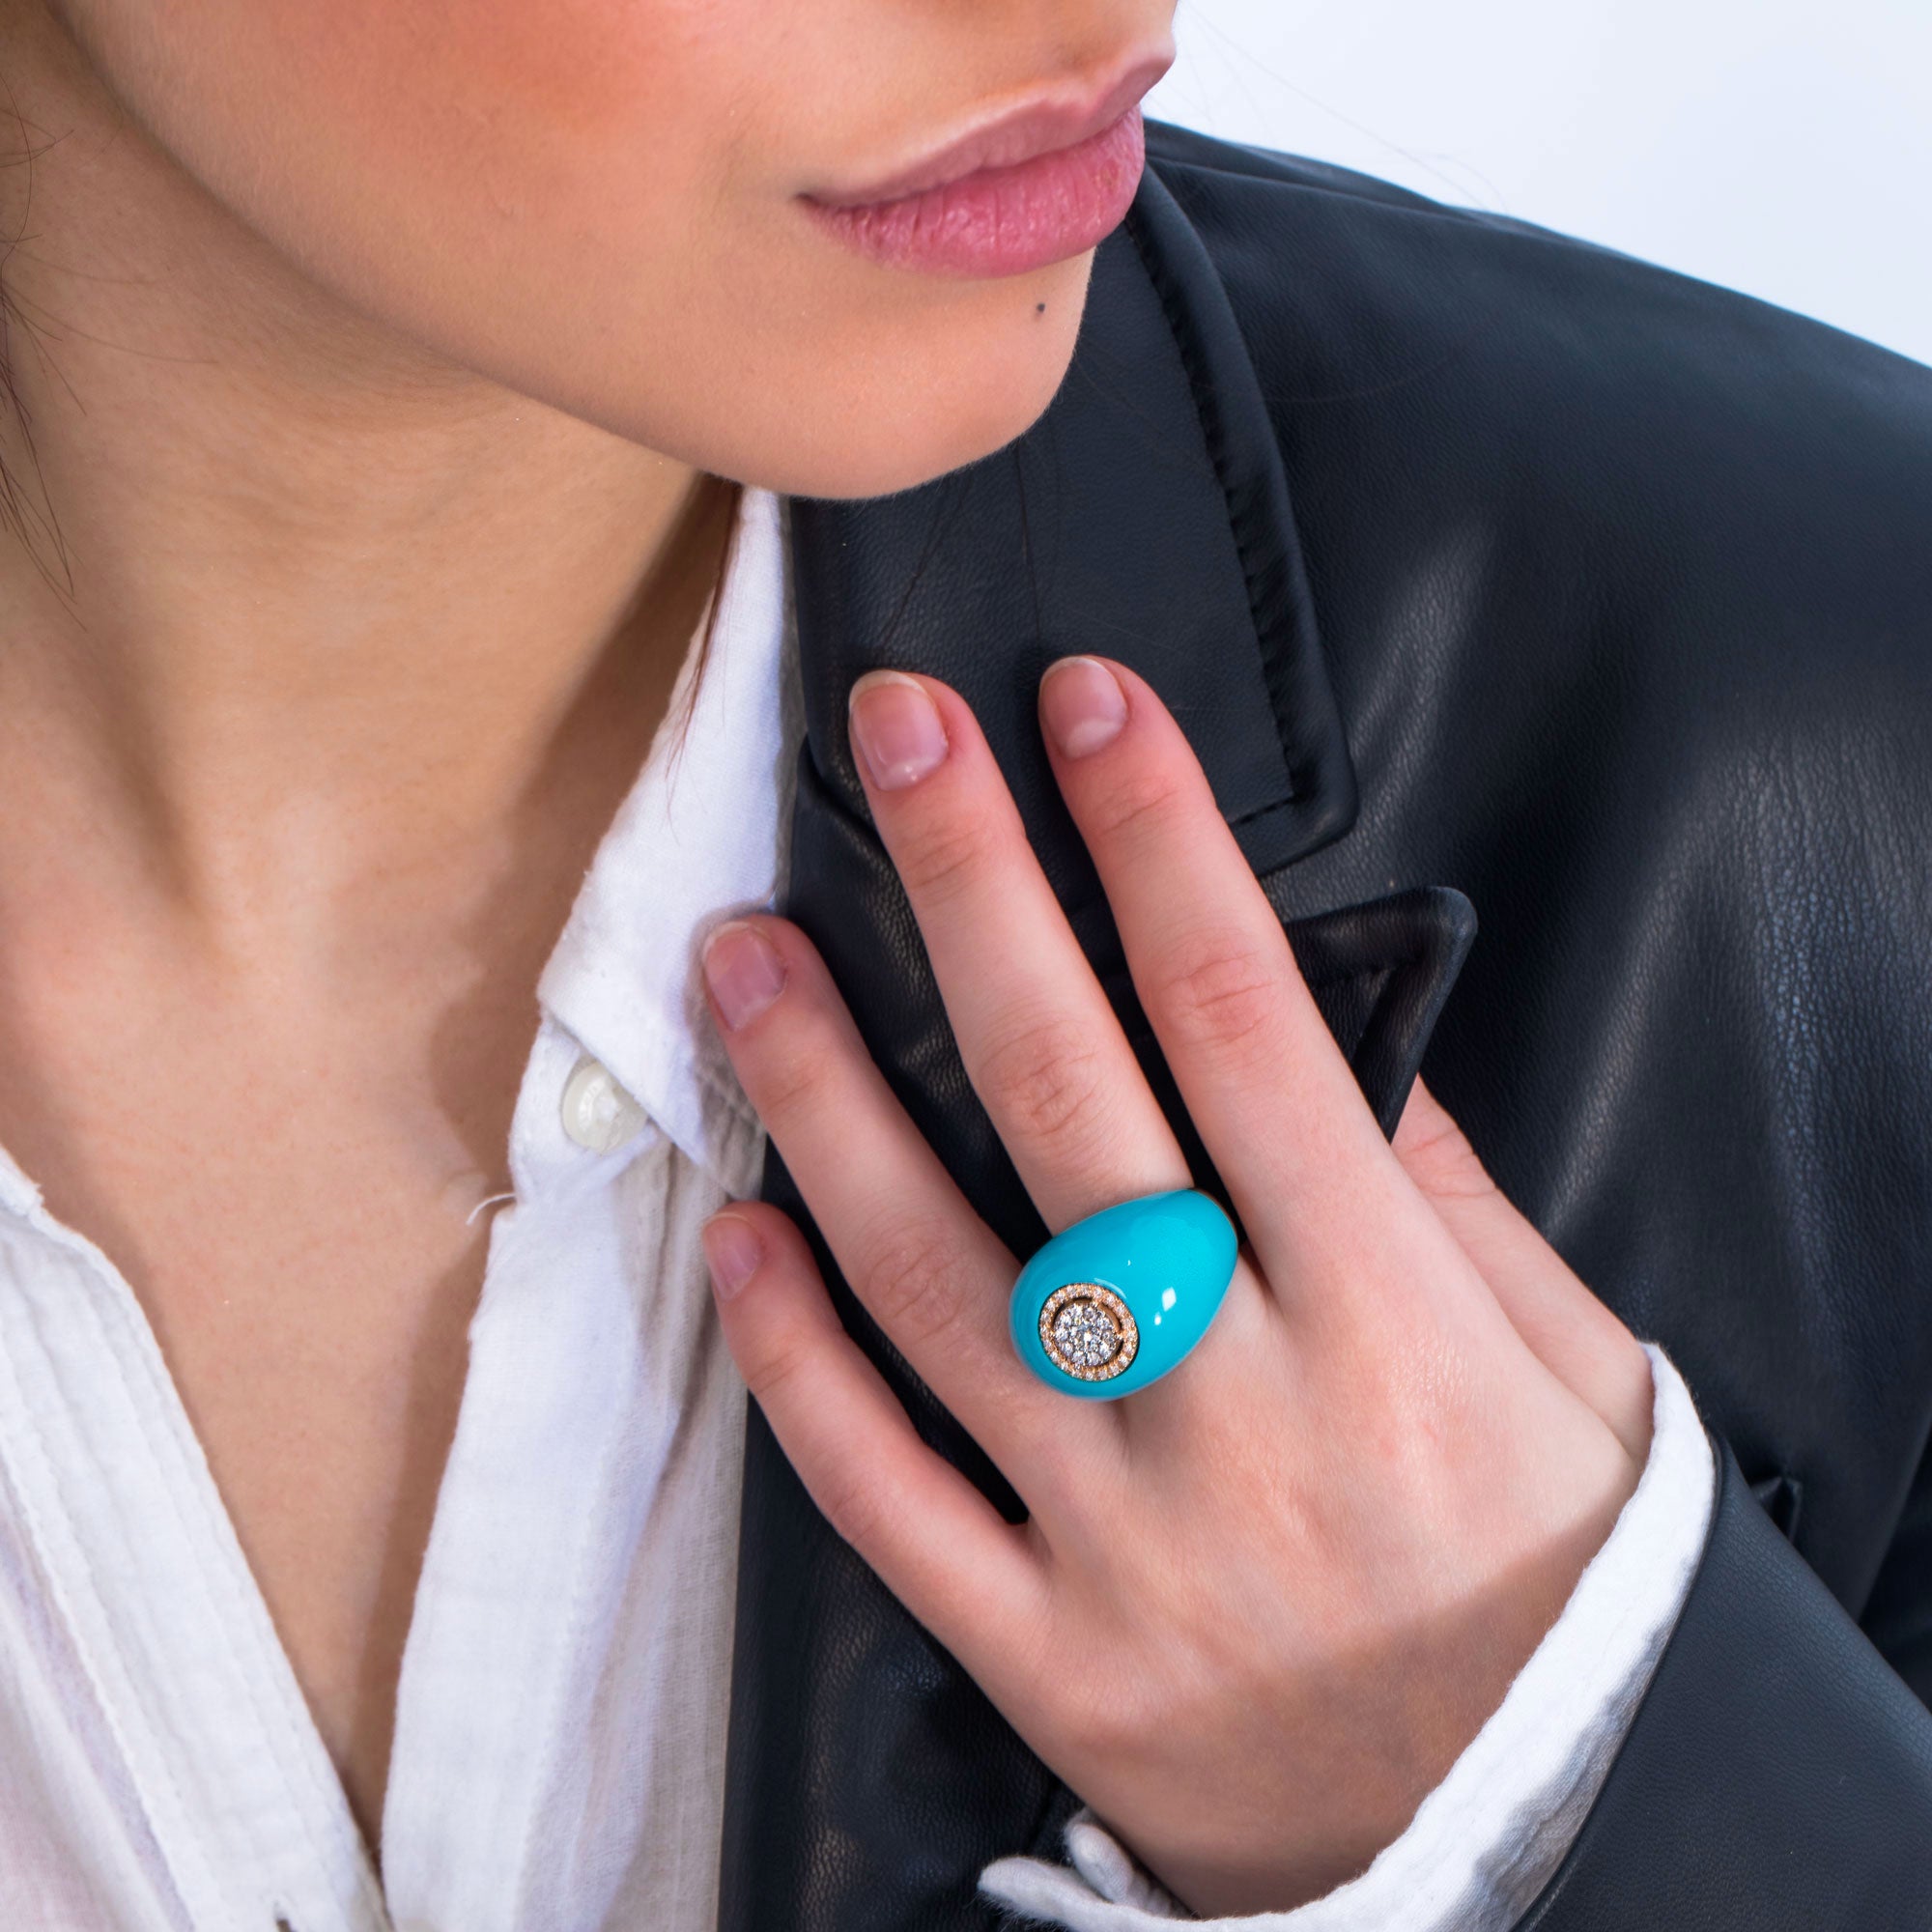 Bague Dome Turquoise